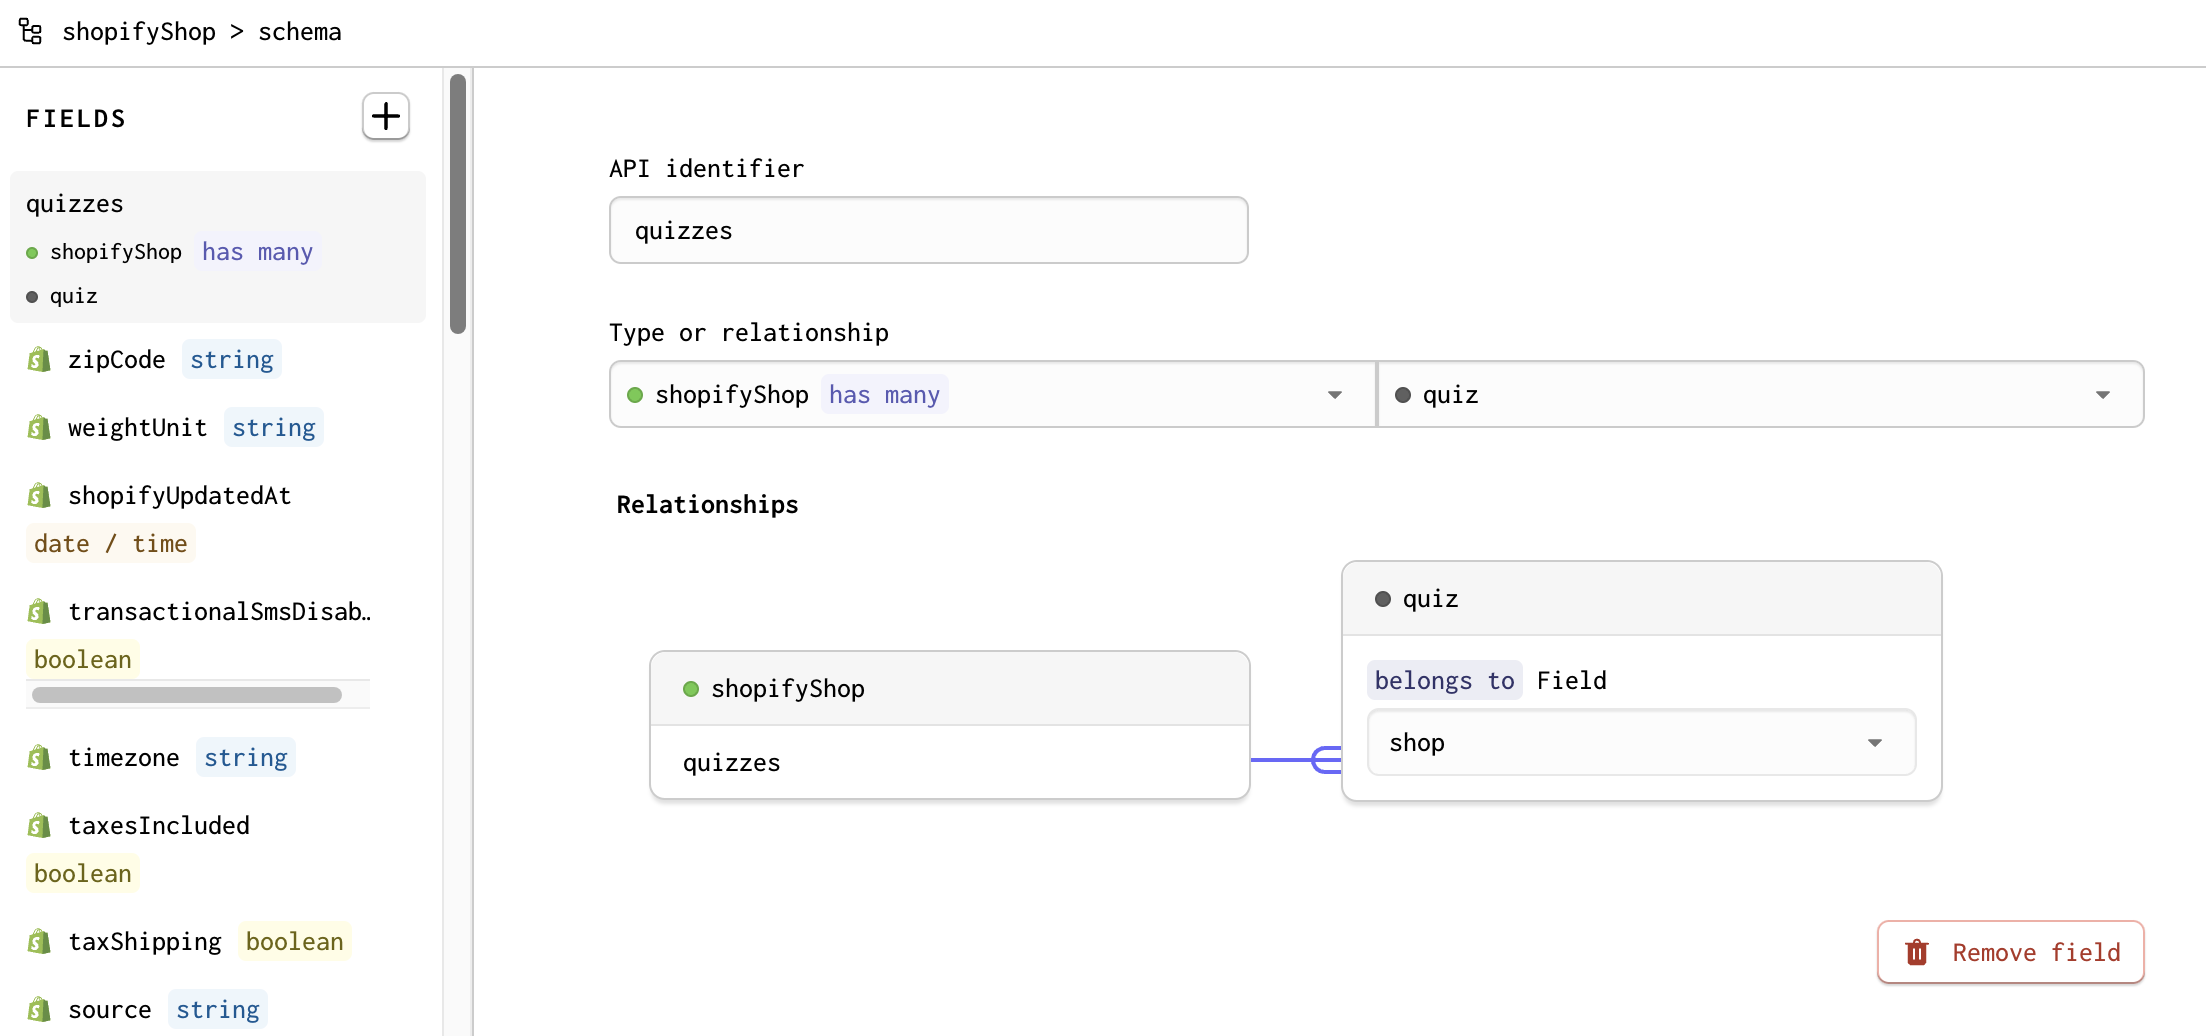 A screenshot of a relationship between a quiz model and the shopifyShop model, from the shopifyShop's schema page. The relationship field is named quizzed, and is defined so that shopifyShop has many quiz records.